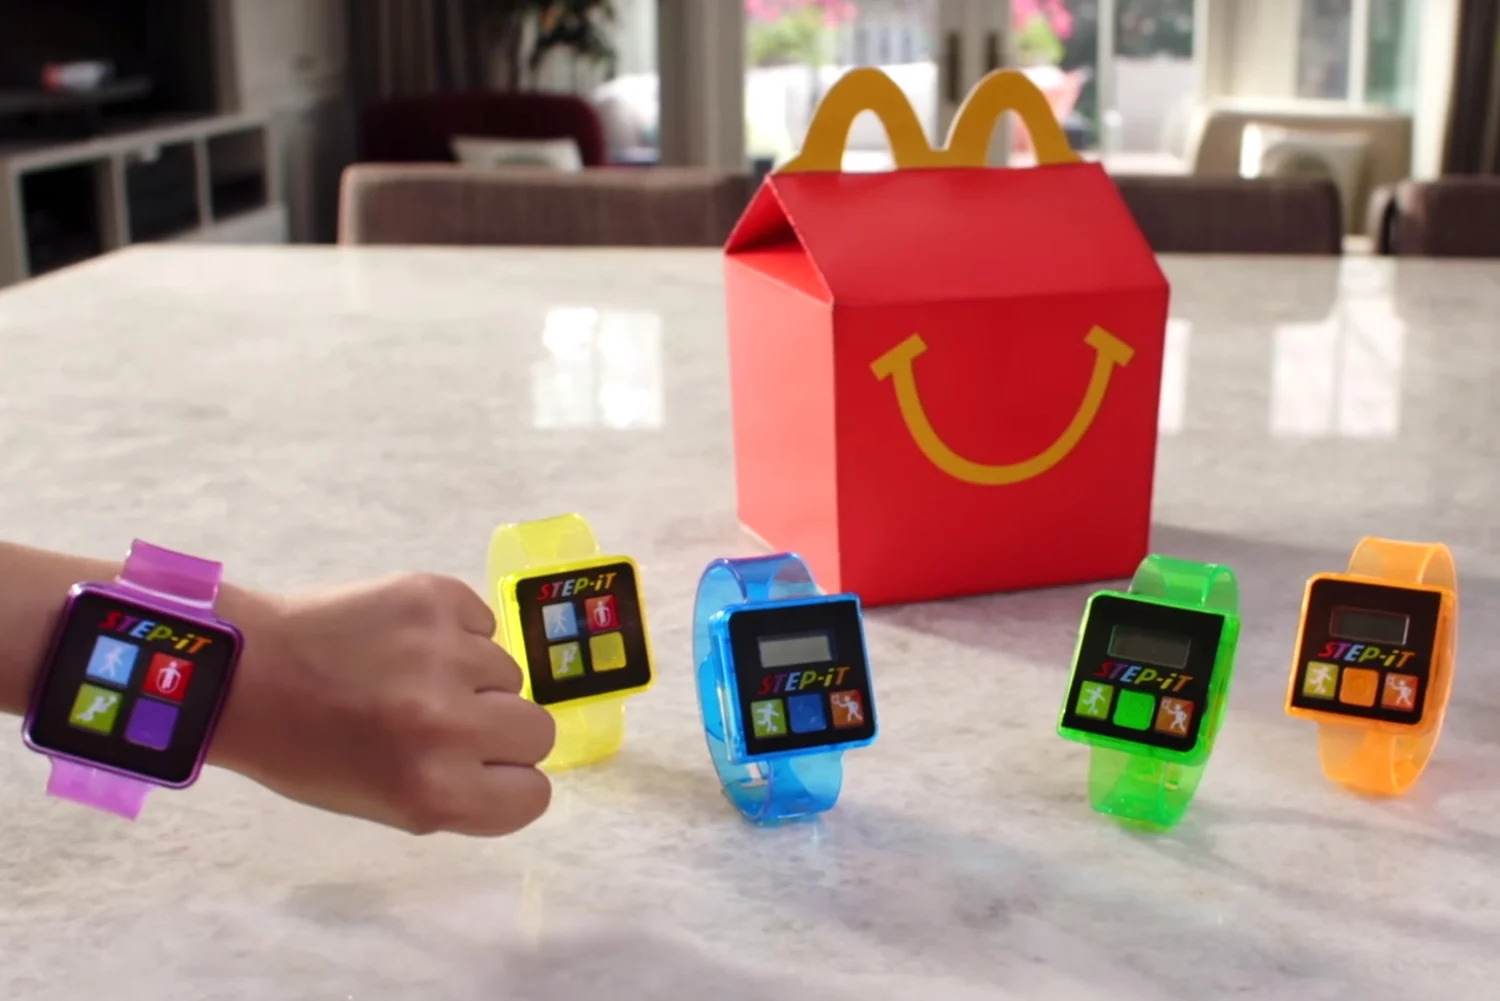 mcdonalds-includes-step-it-fitness-tracker-in-kids-meals